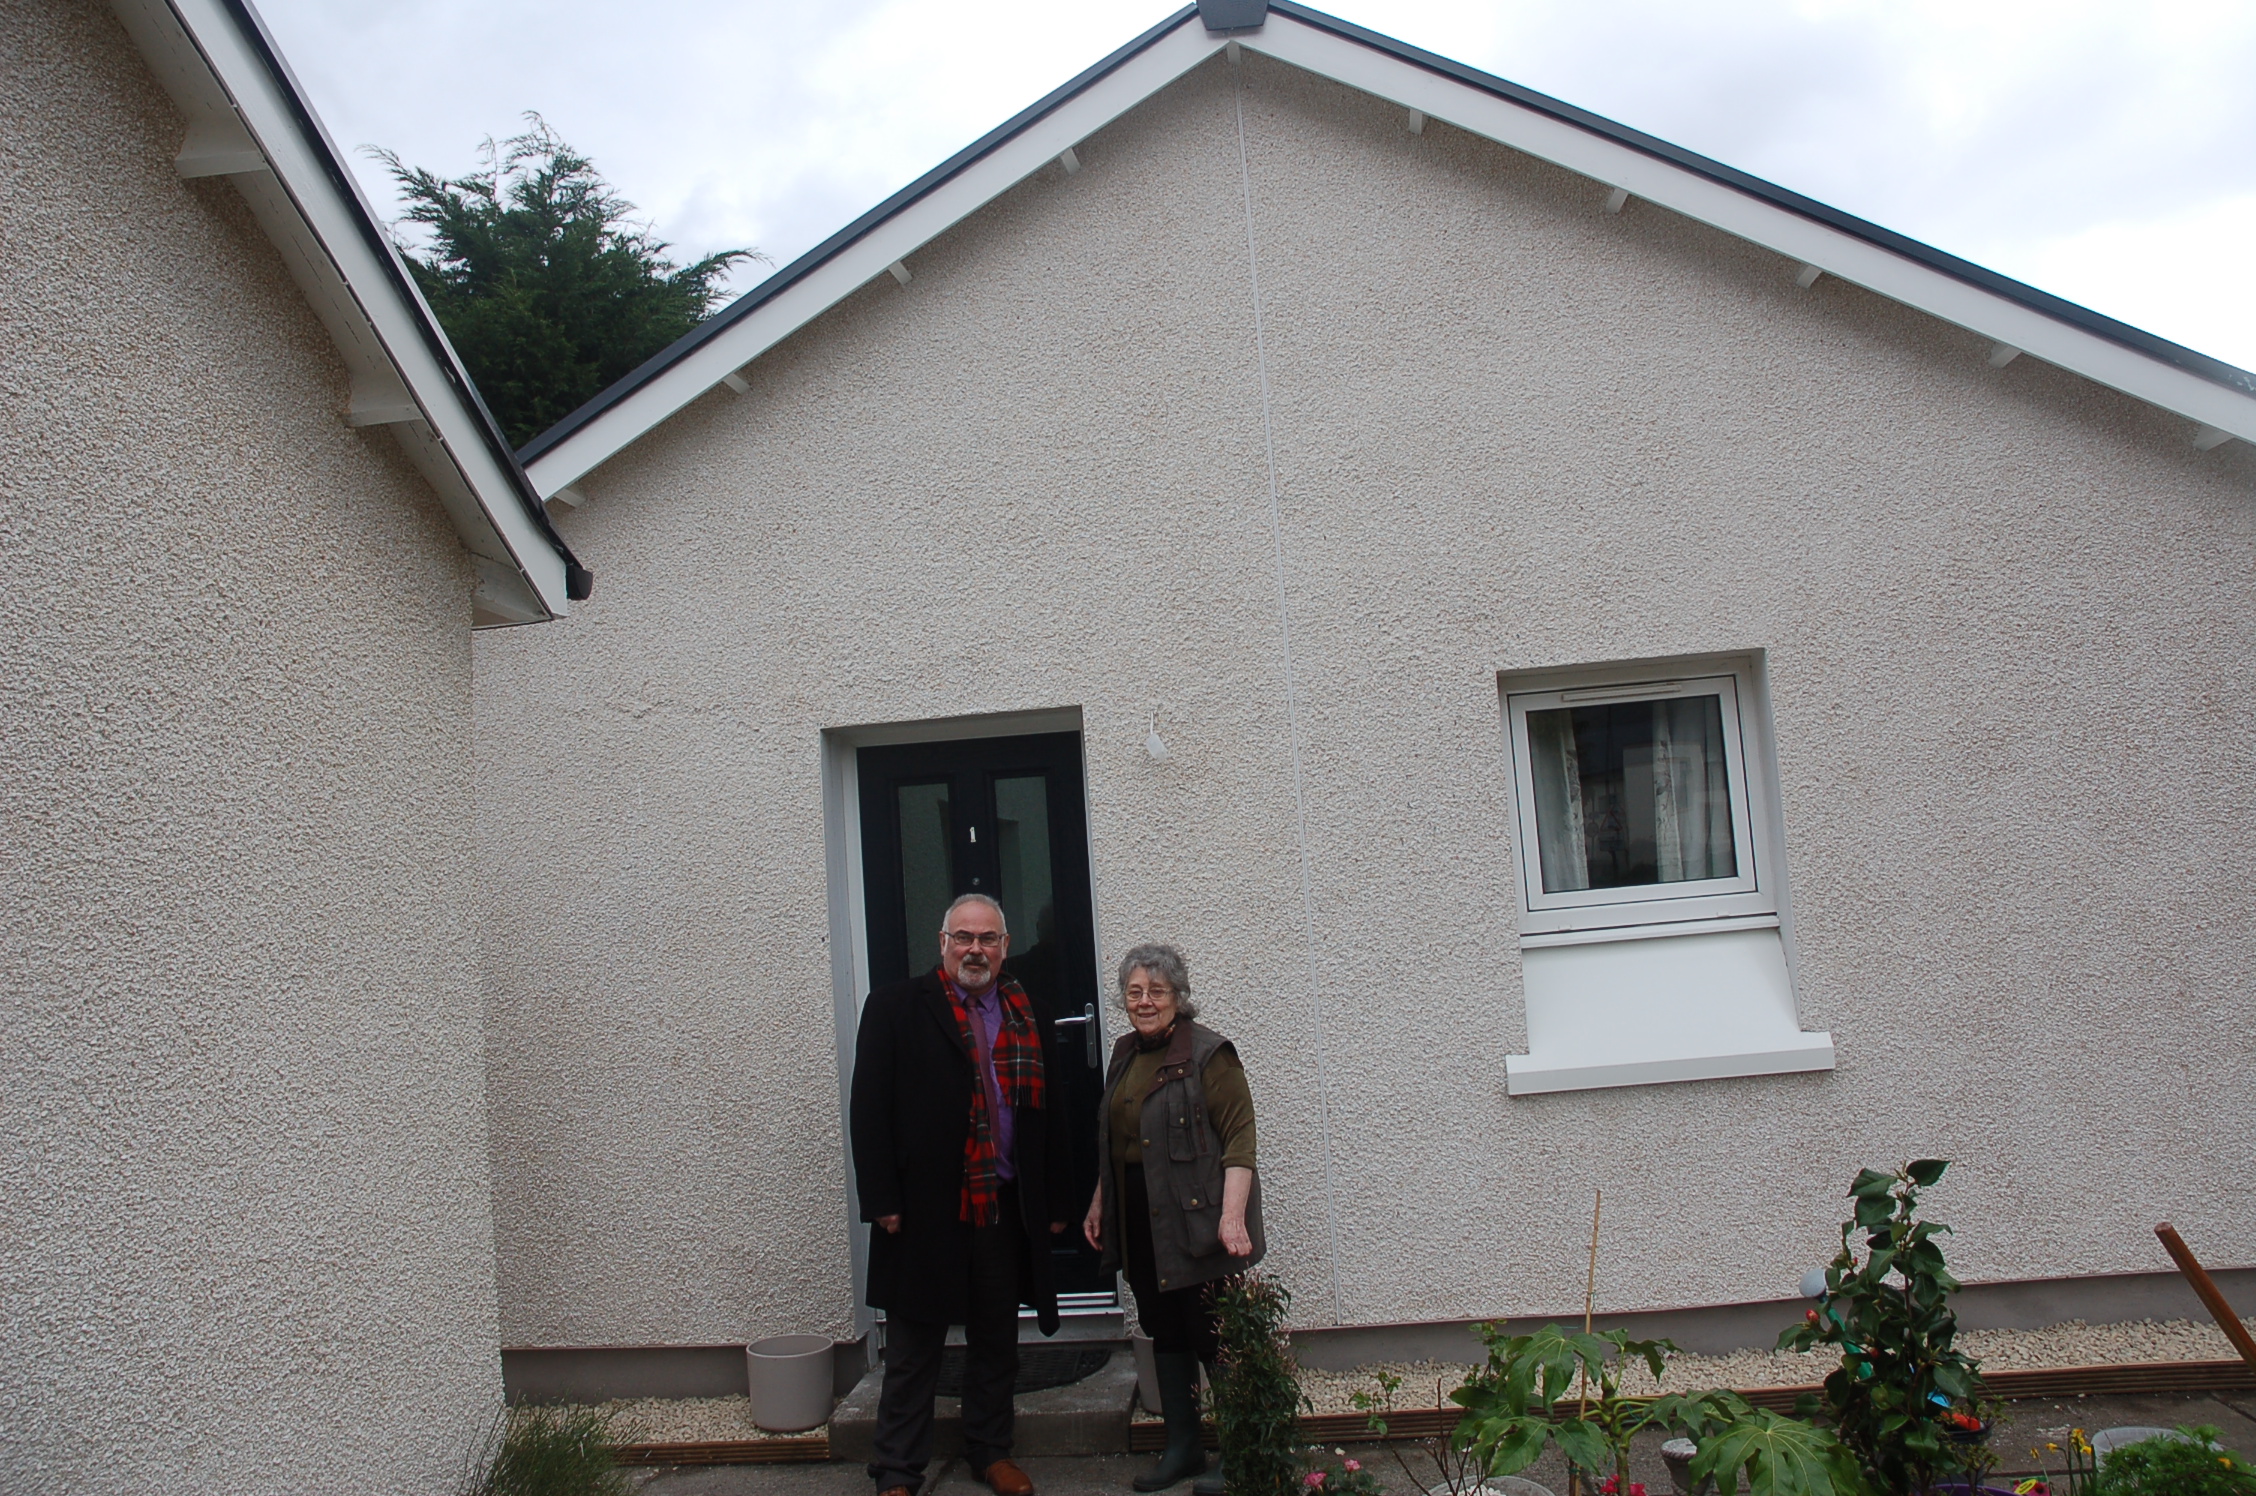 ACHA completes housing improvements in Luss